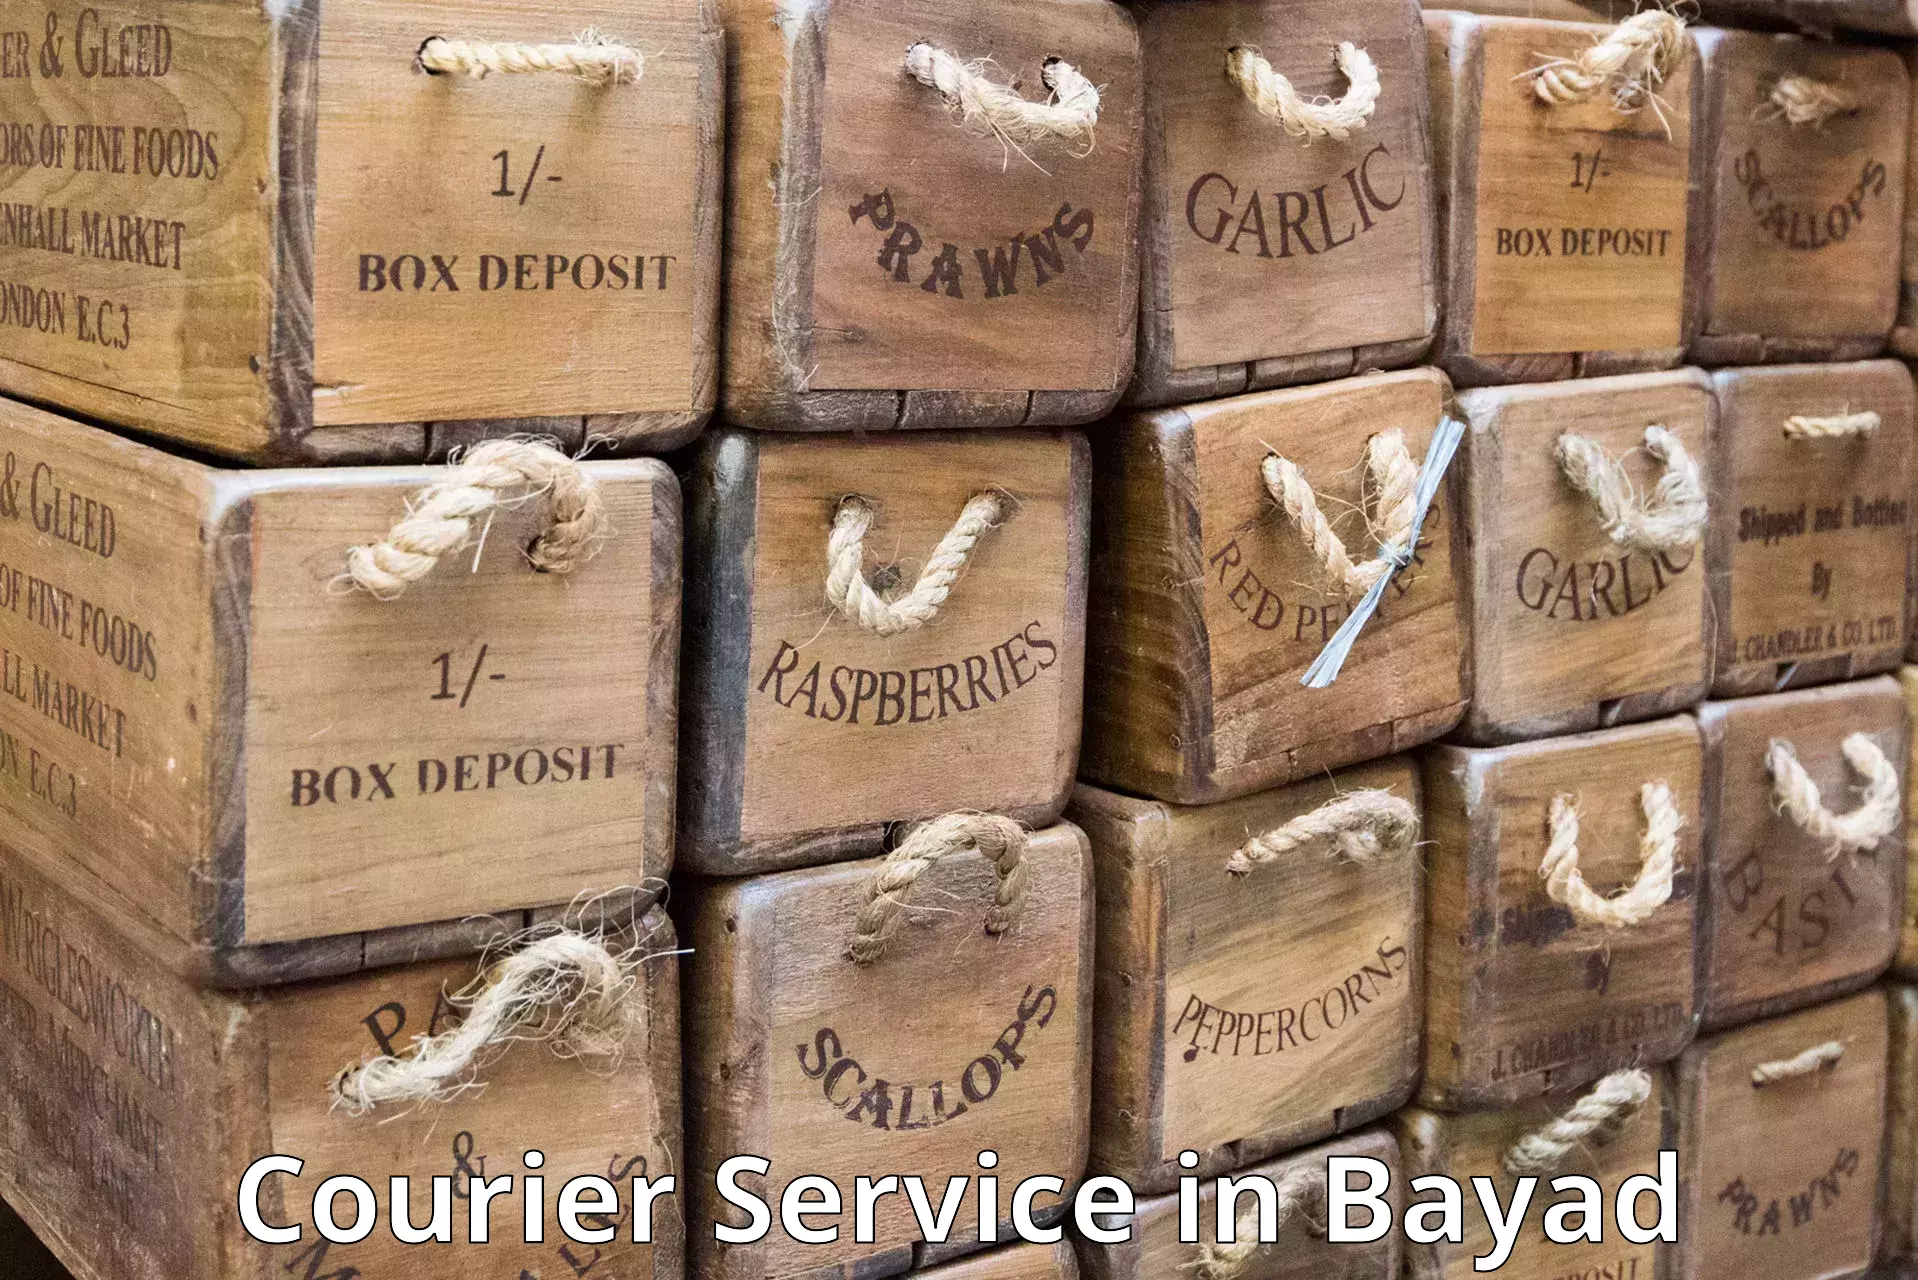 Tailored freight services in Bayad